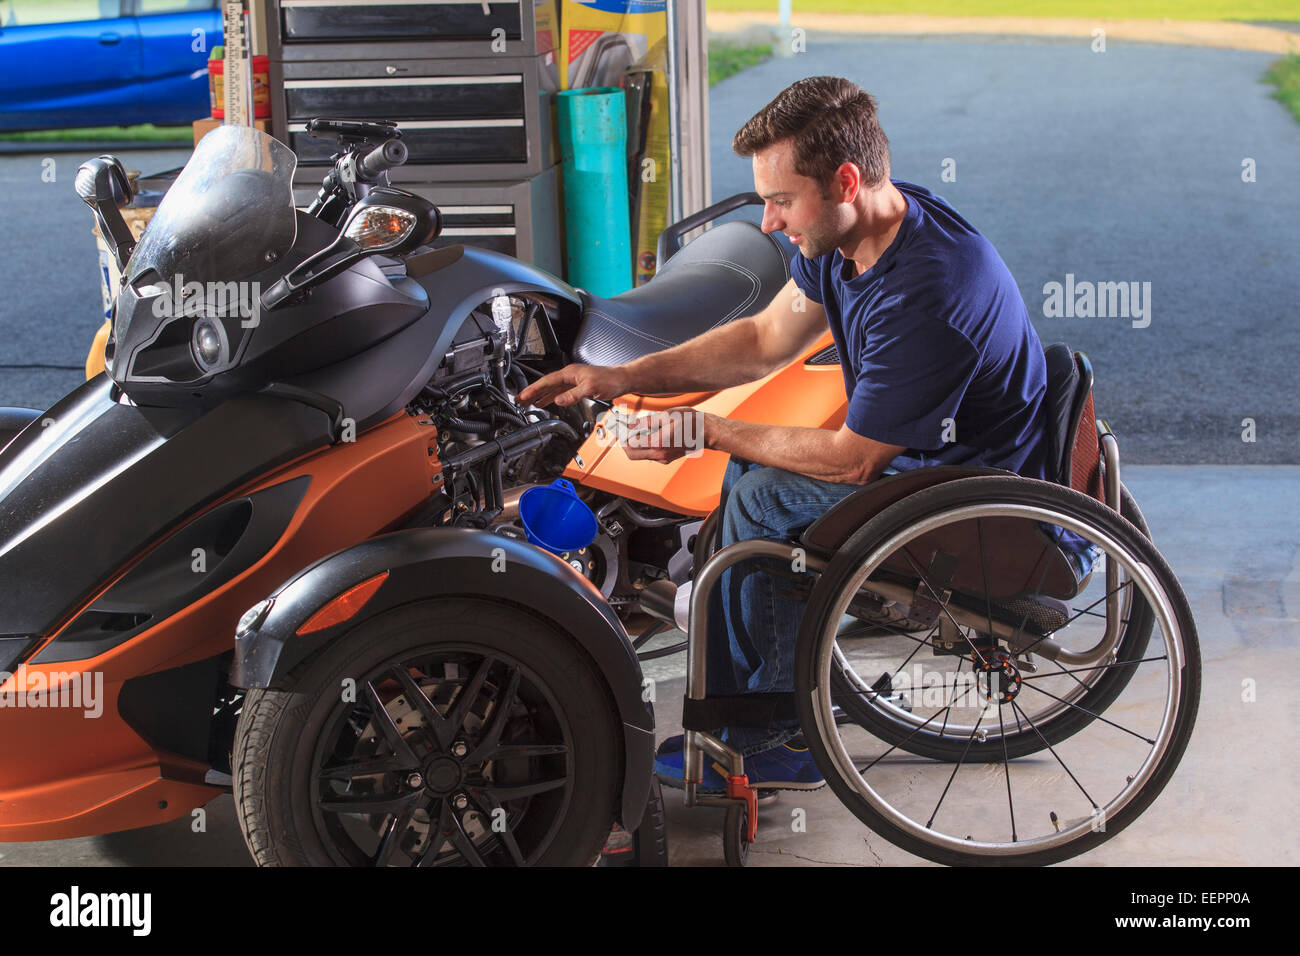 Man with spinal cord injury building his custom motorcycle Stock Photo